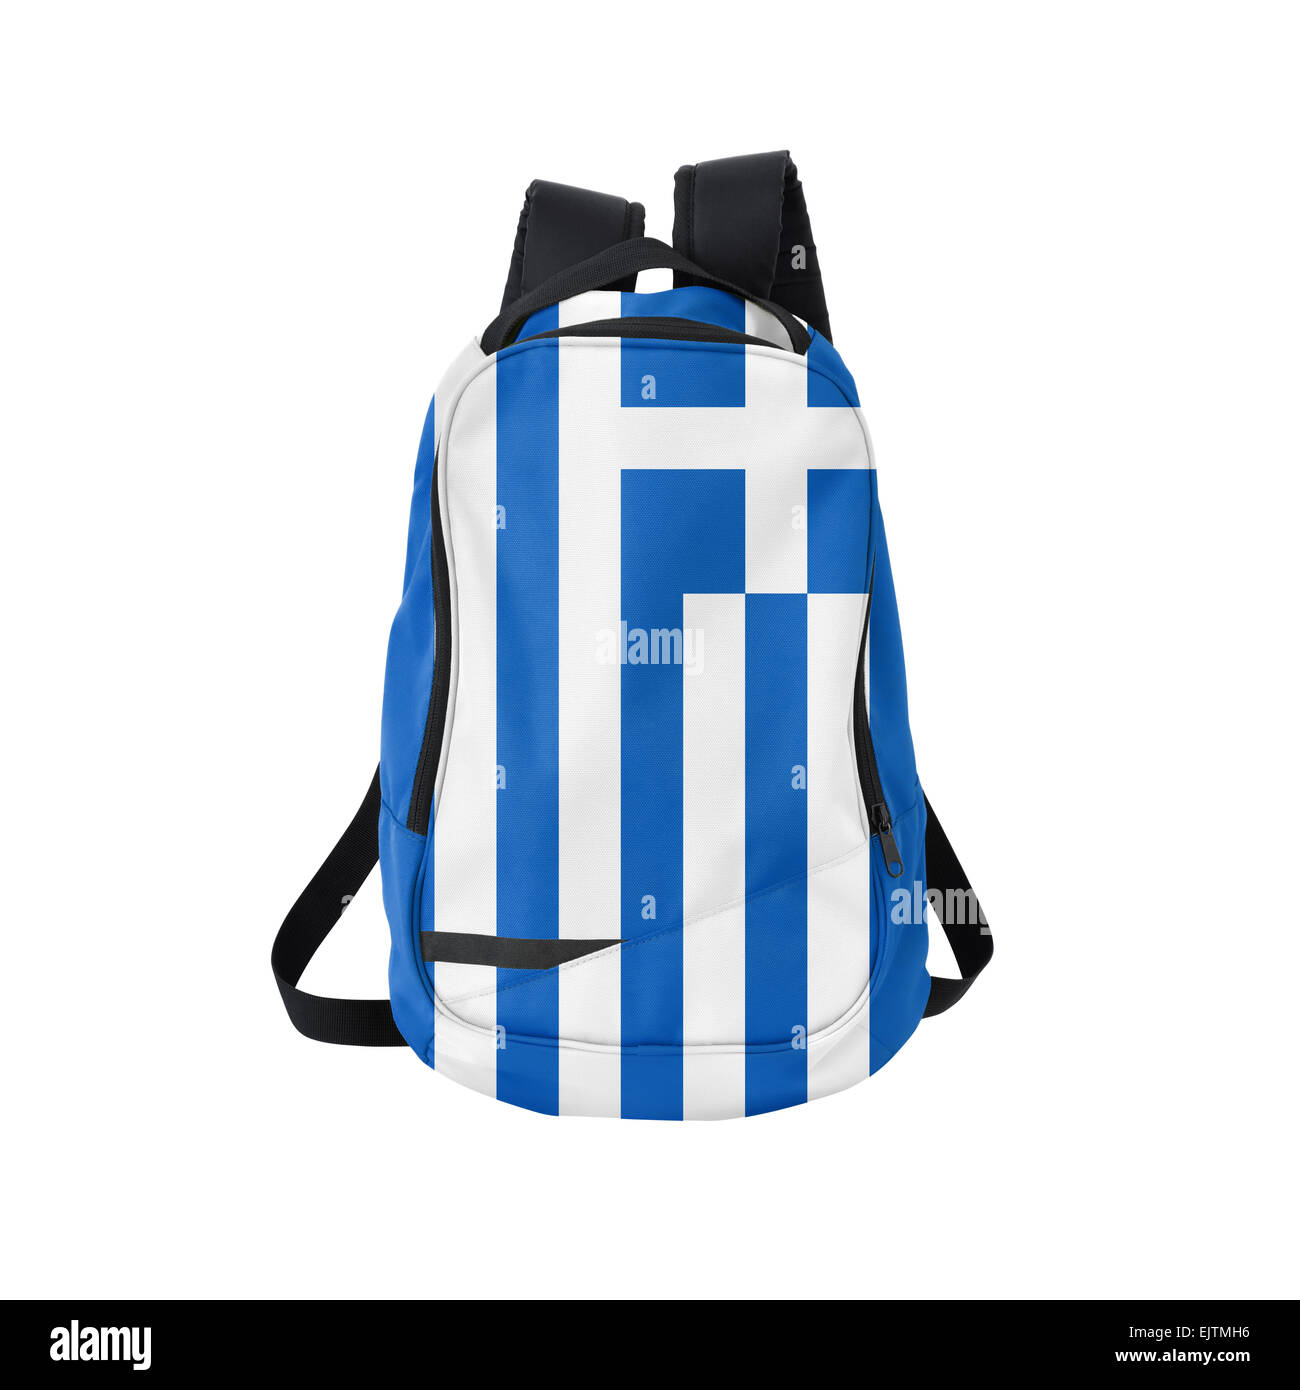 Greece flag backpack isolated on white background. Back to school concept. Education and study abroad. Travel and tourism Stock Photo